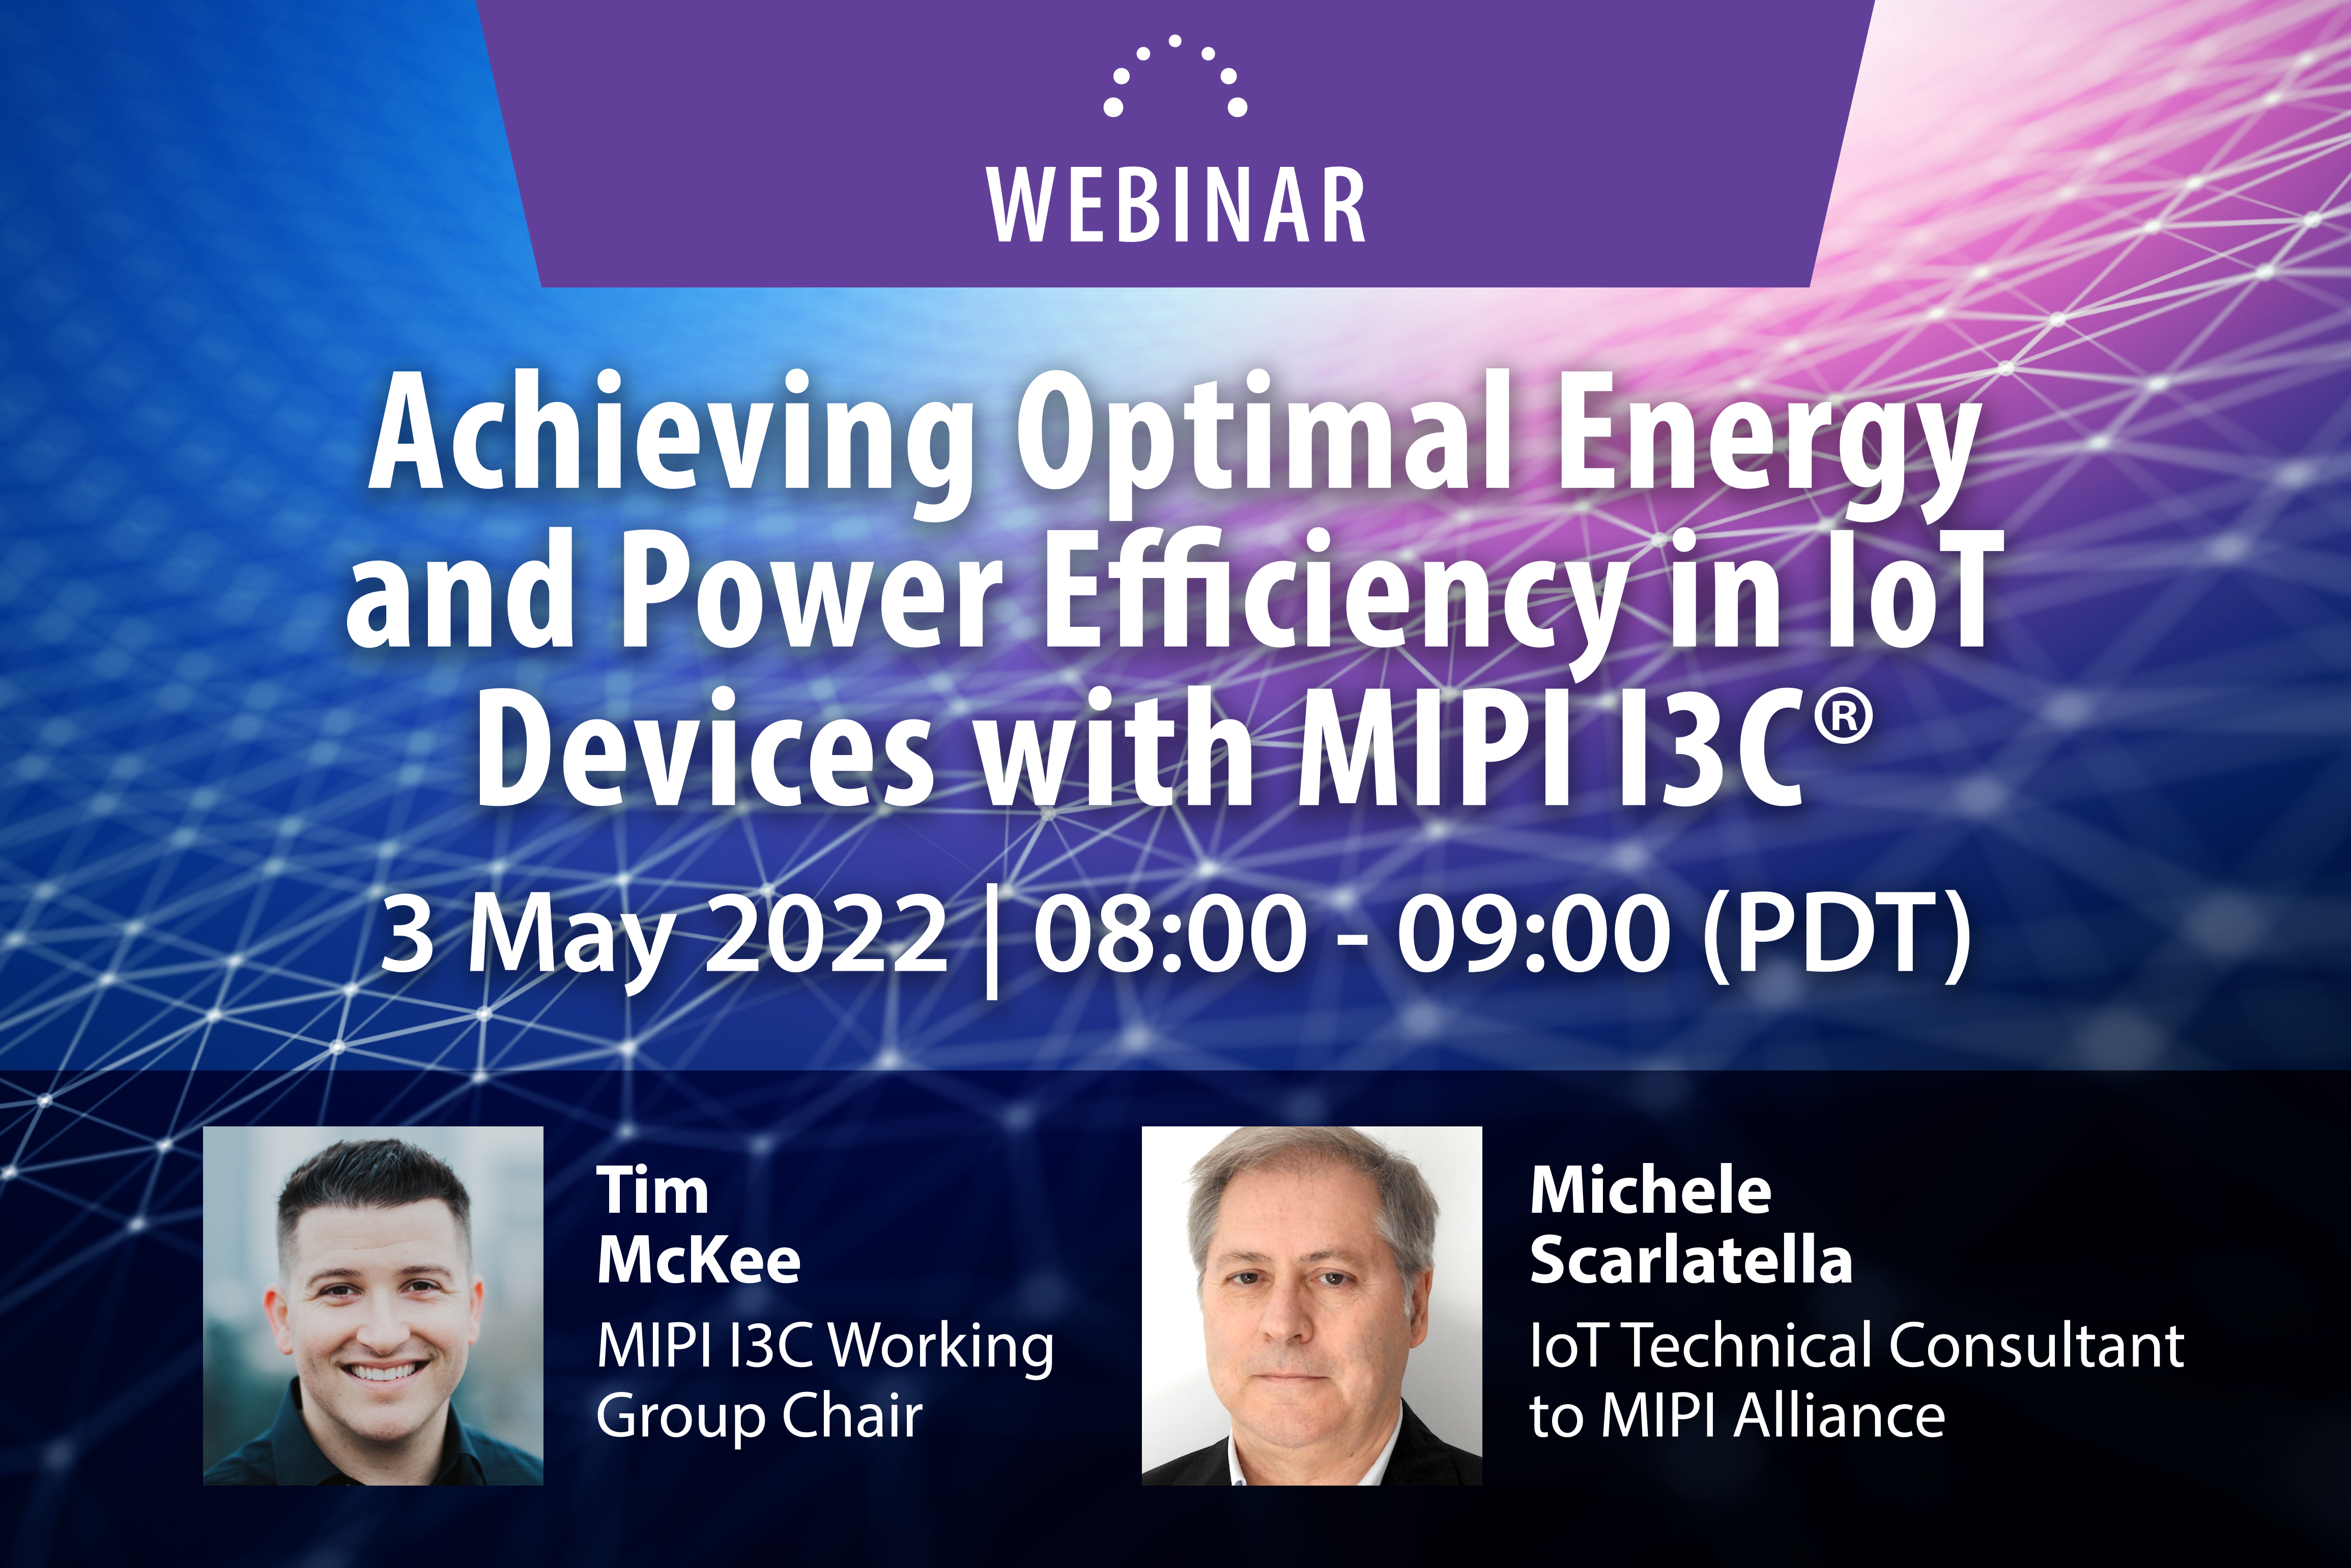 MIPI Webinar: Achieving Optimal Energy and Power Efficiency in IoT Devices with MIPI I3C